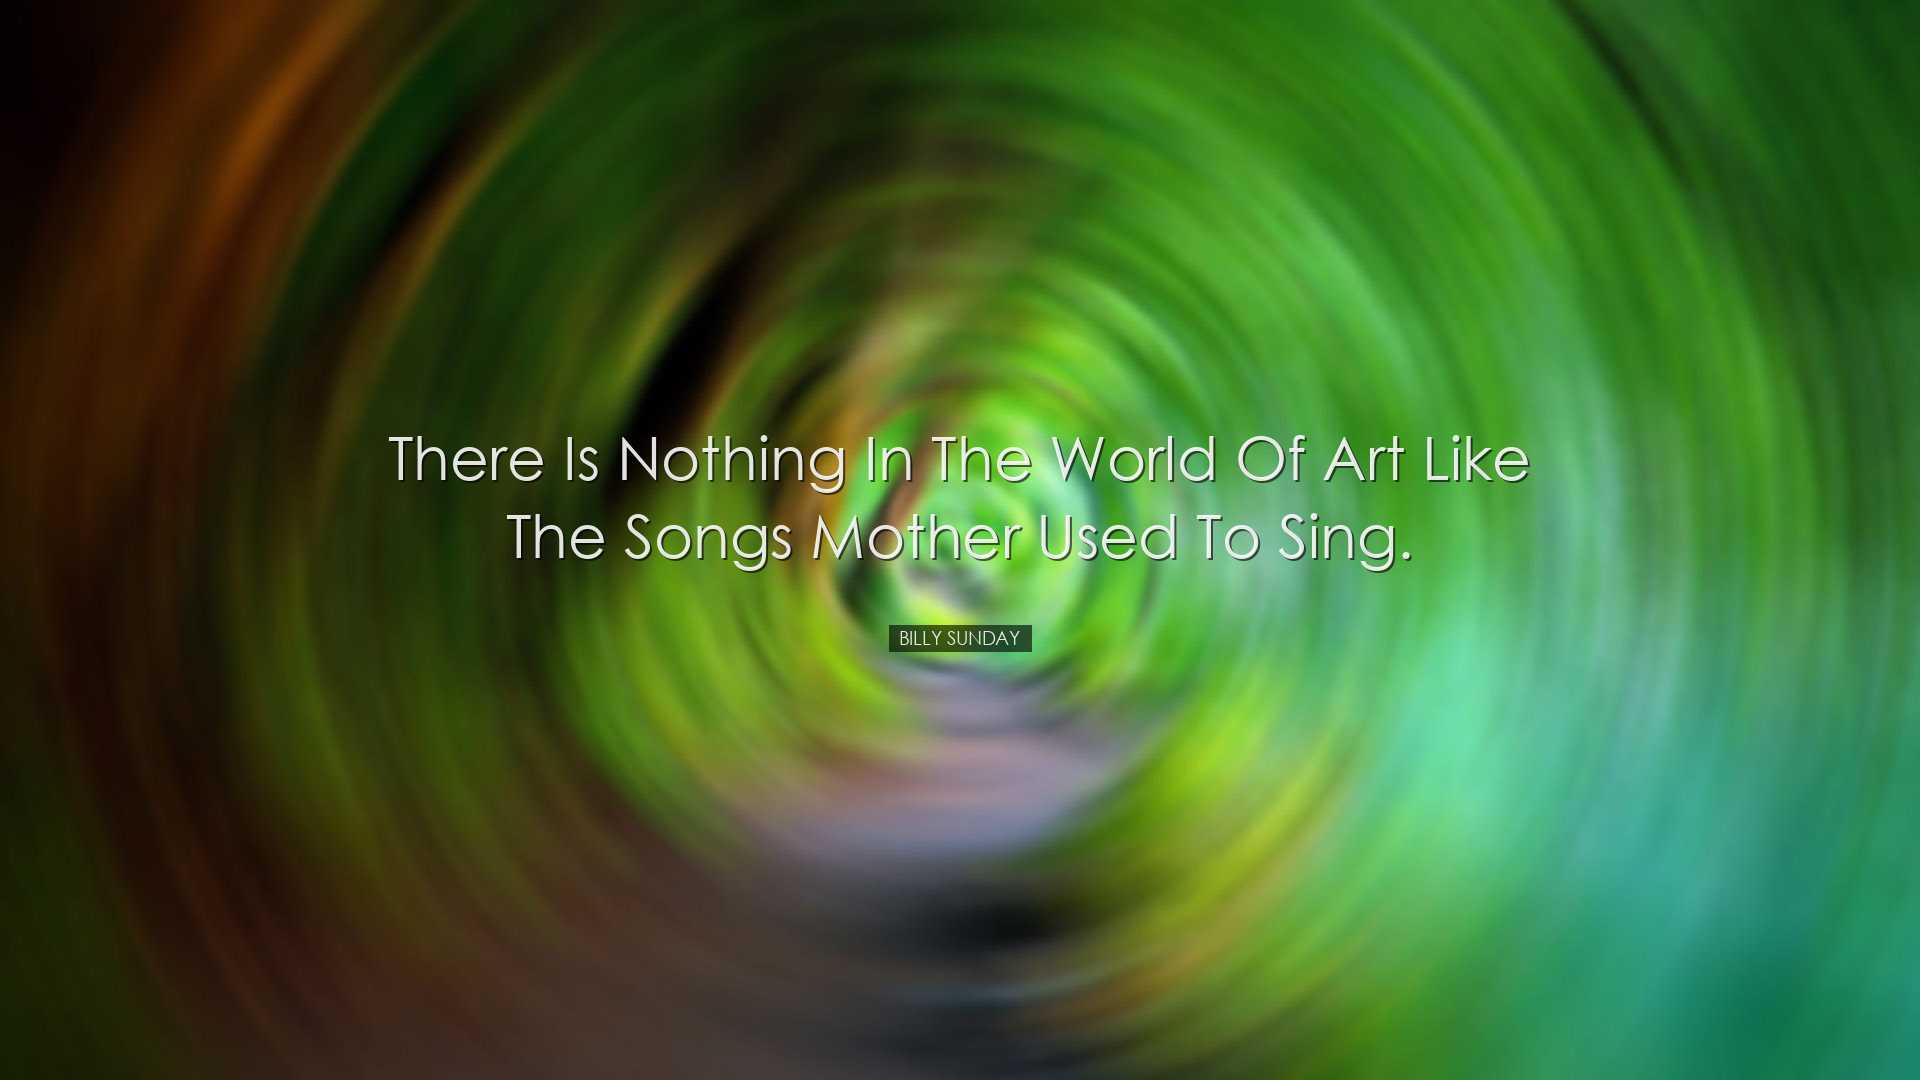 There is nothing in the world of art like the songs mother used to